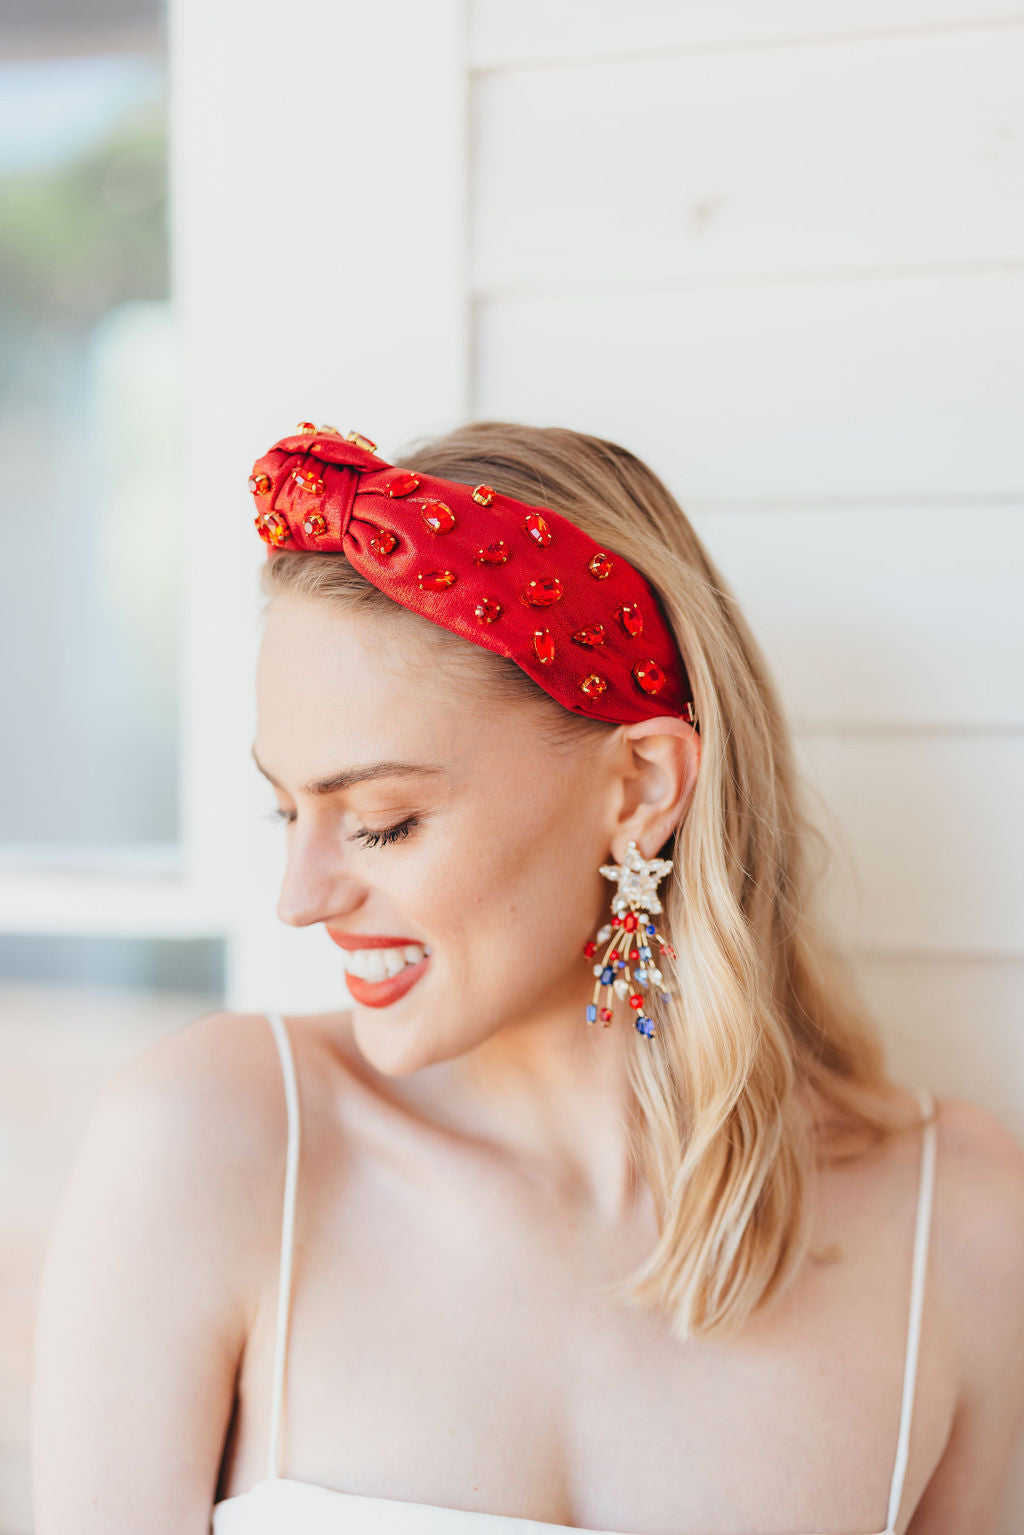 Adult Size Shimmer Headband with Hand-Sewn Crystals in Red